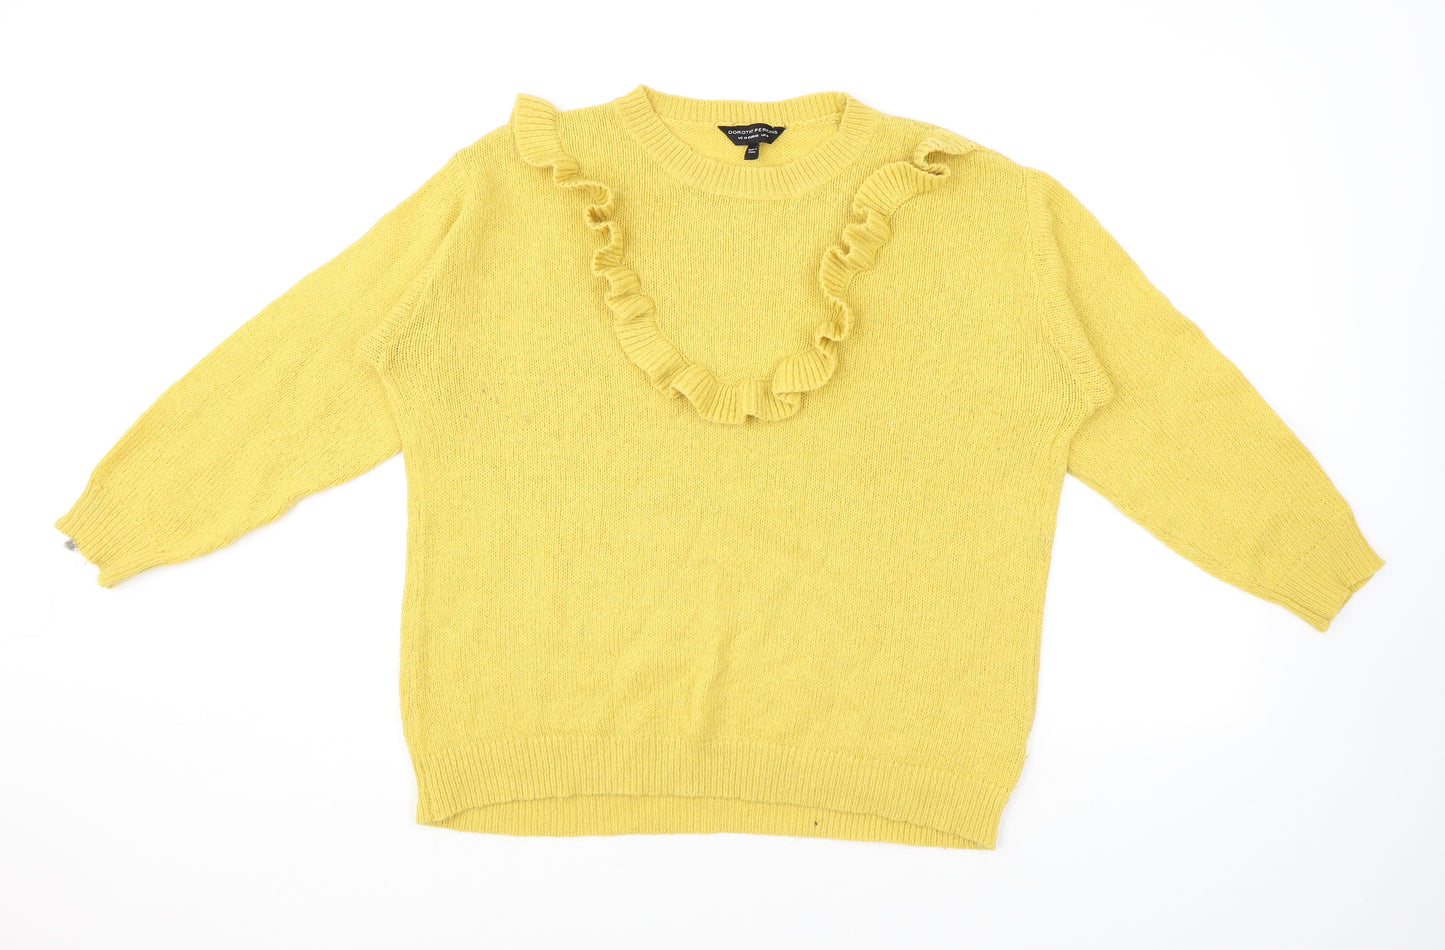 Dorothy Perkins Womens Yellow Round Neck Acrylic Pullover Jumper Size 18